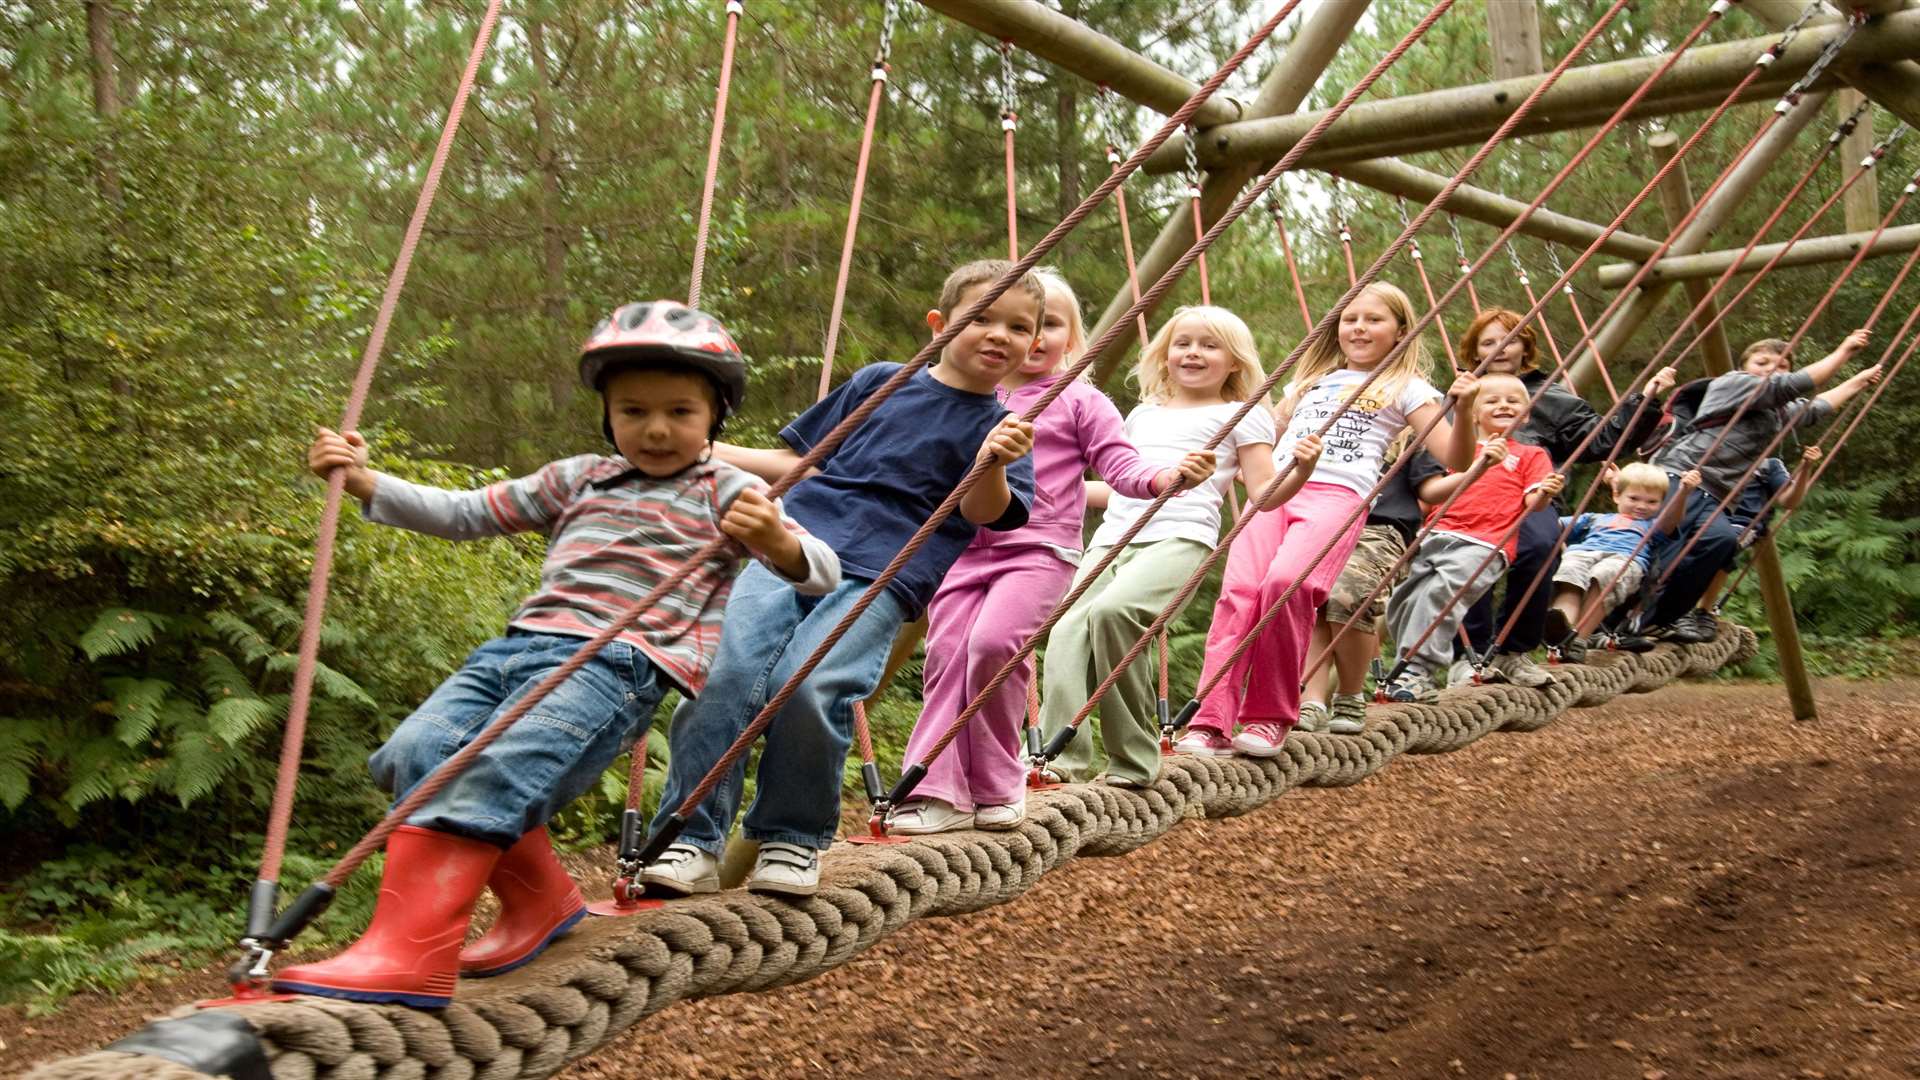 The Forestry Commission's Bedgebury Pinetum at Goudhurst is perfect for children